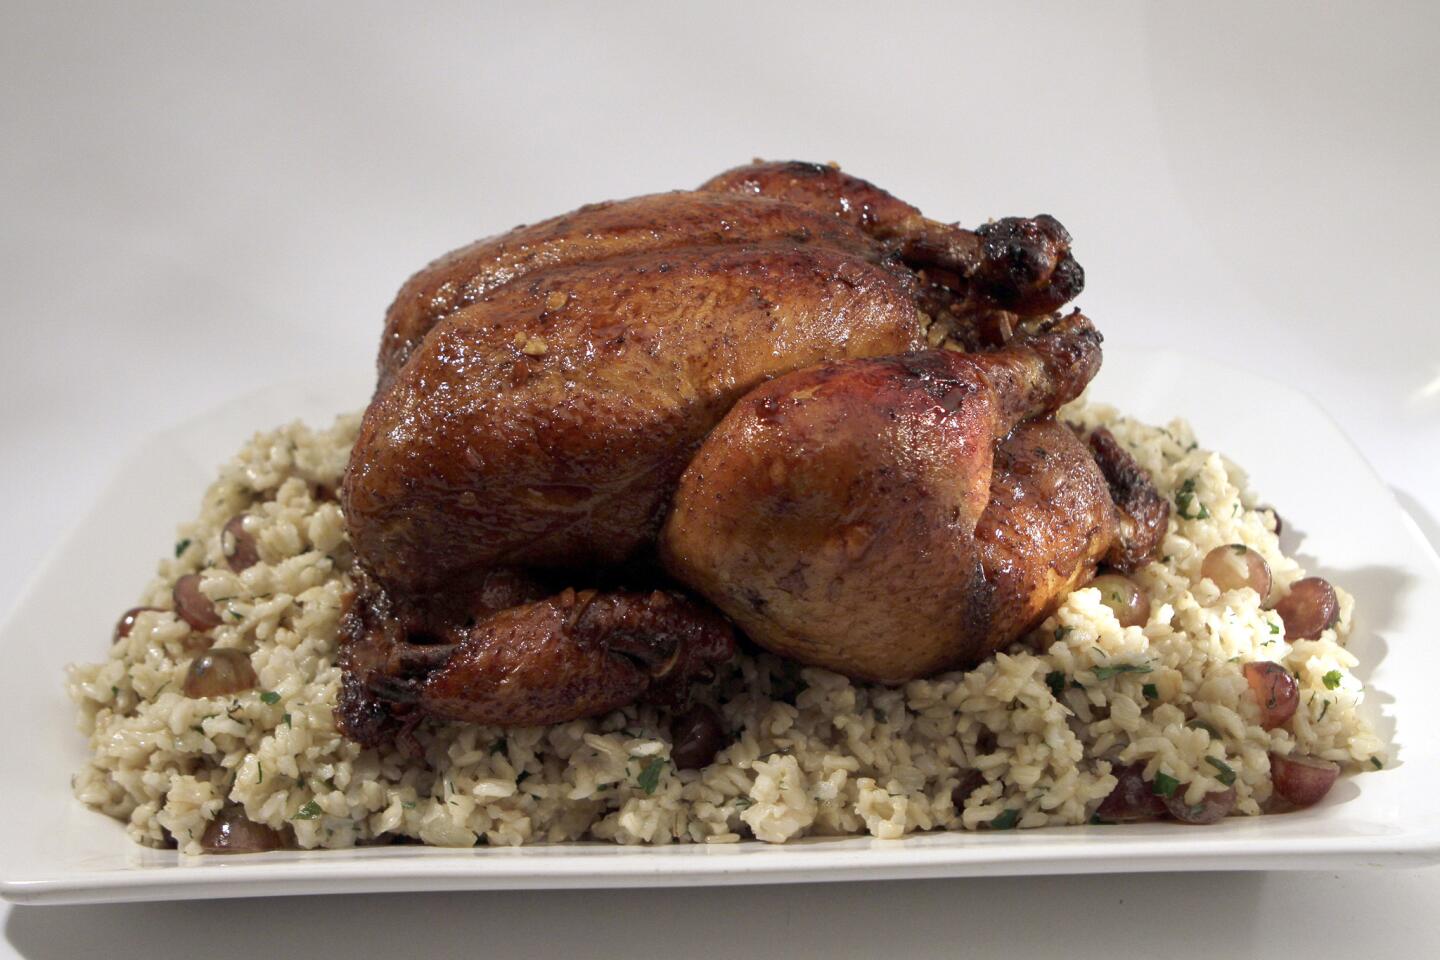 Recipe: Marinated chicken stuffed with brown rice and grapes